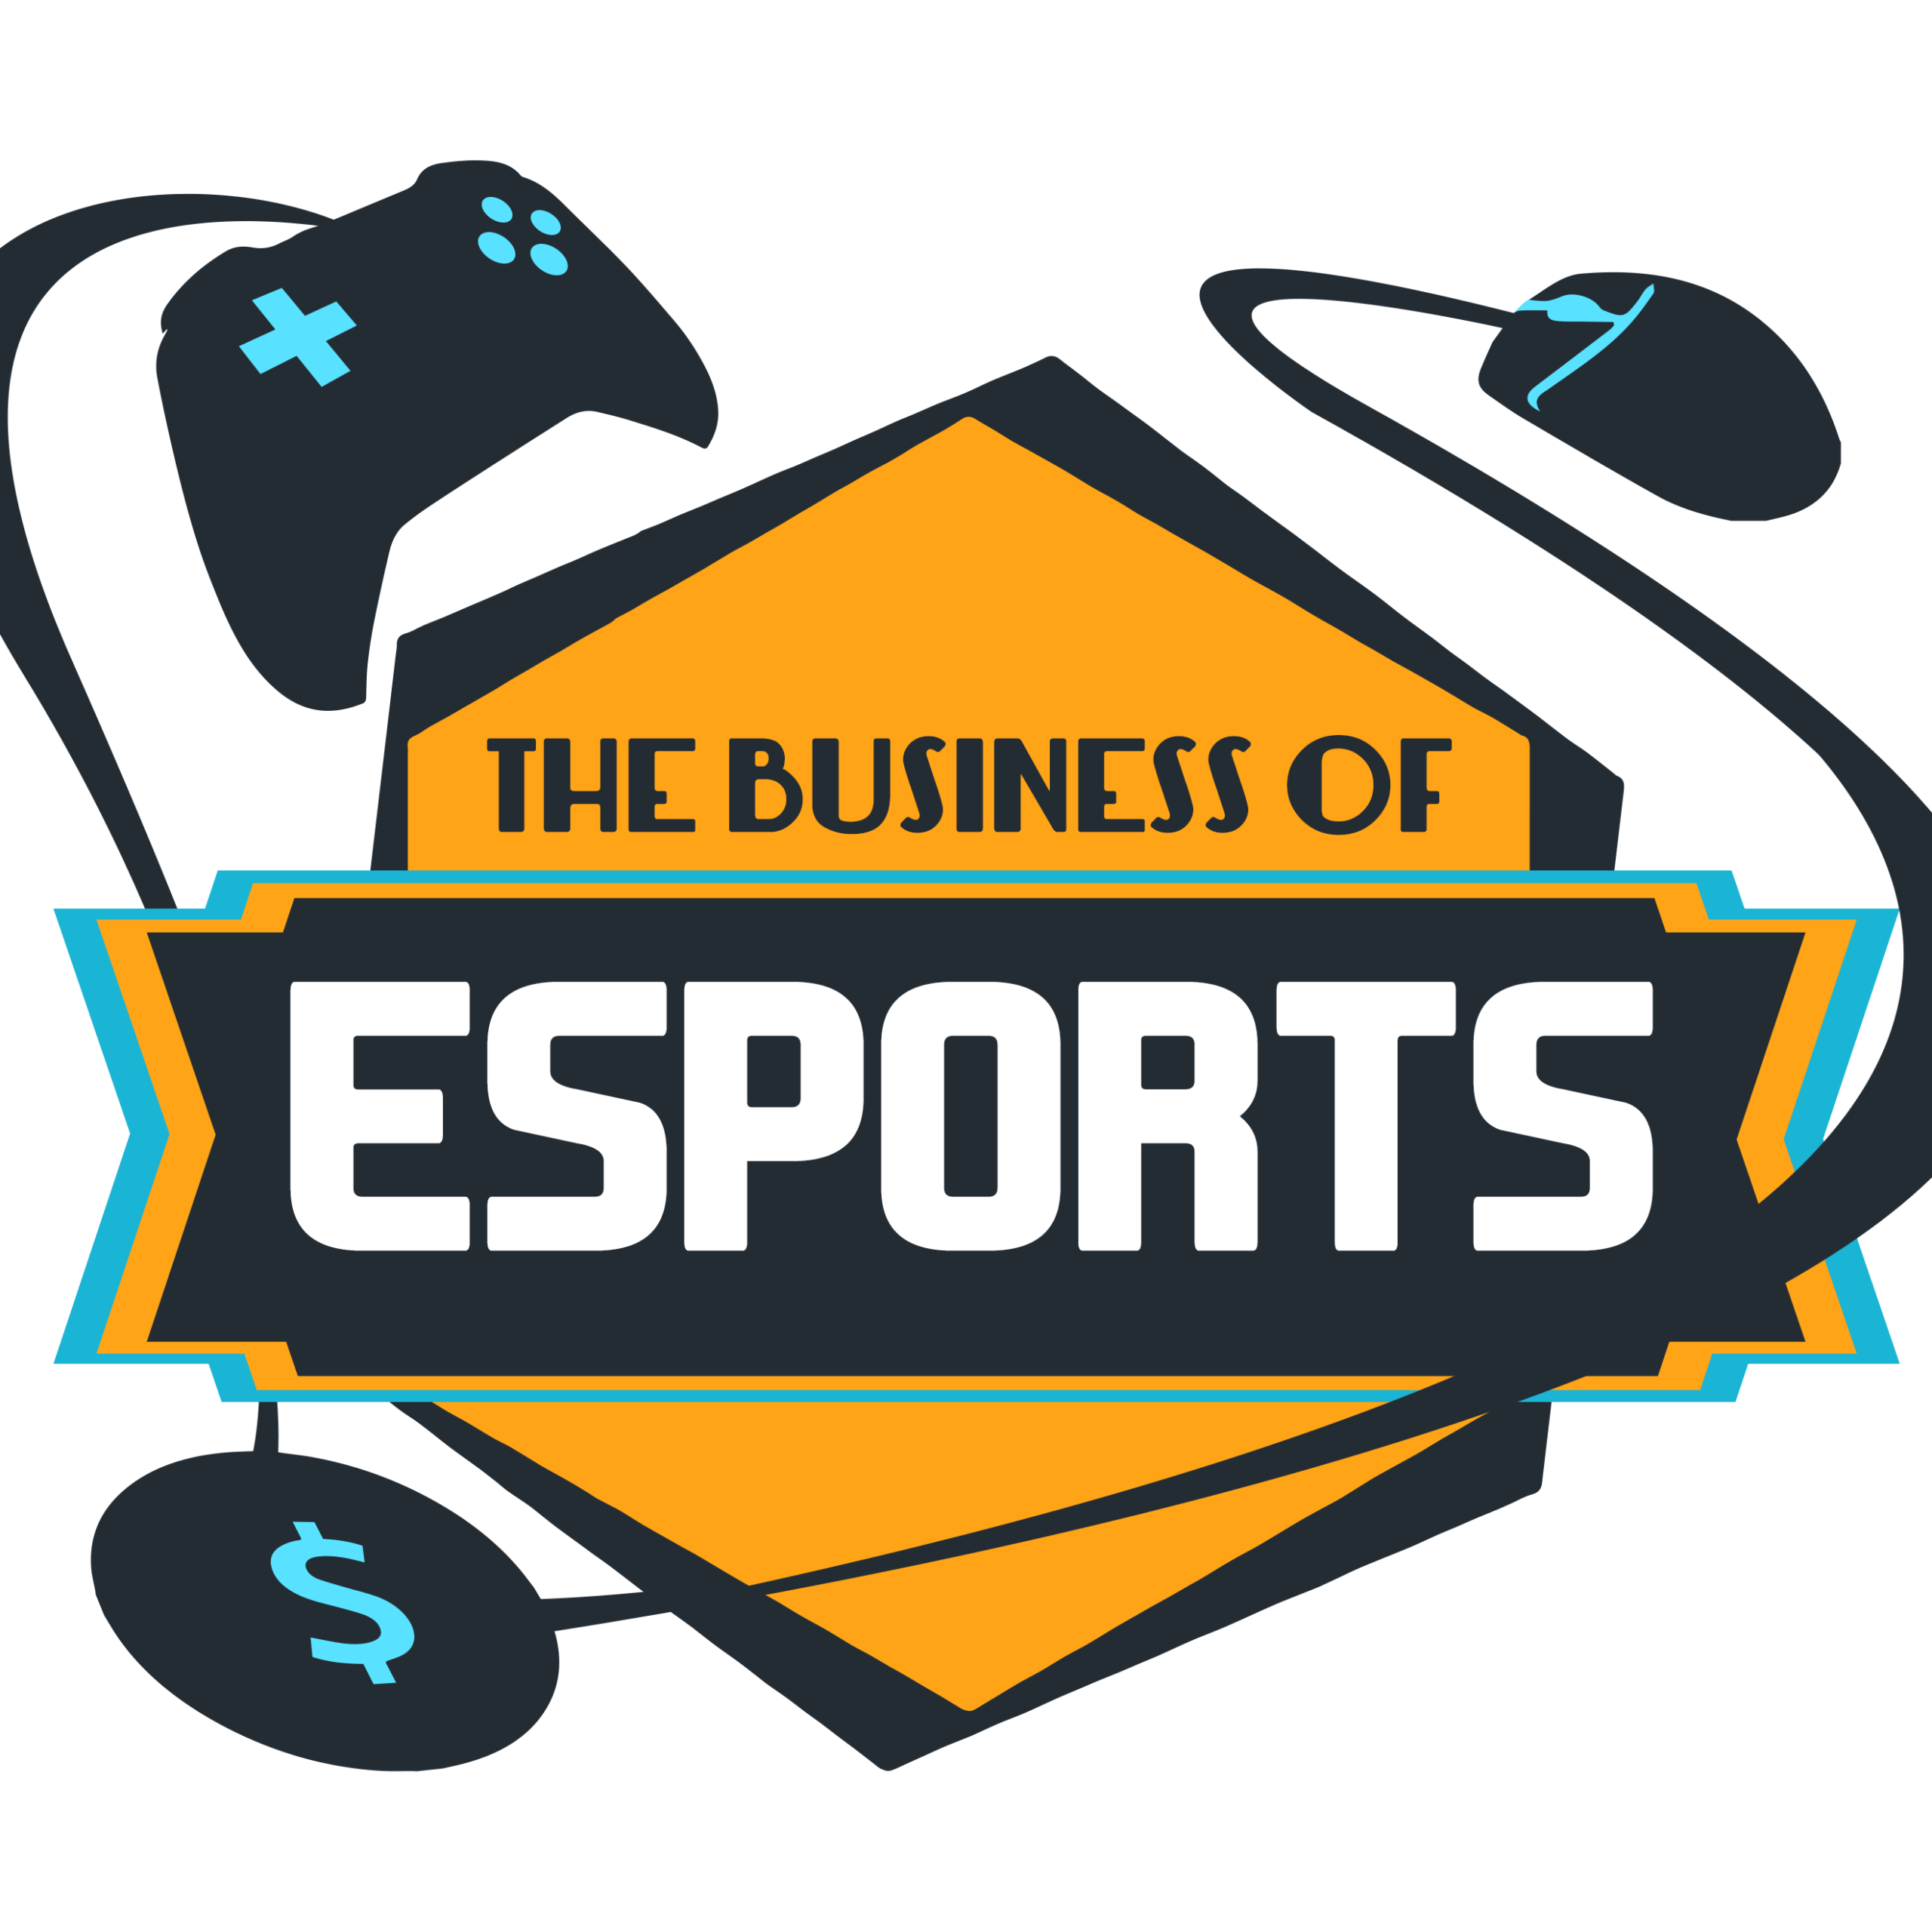 Business of Esports